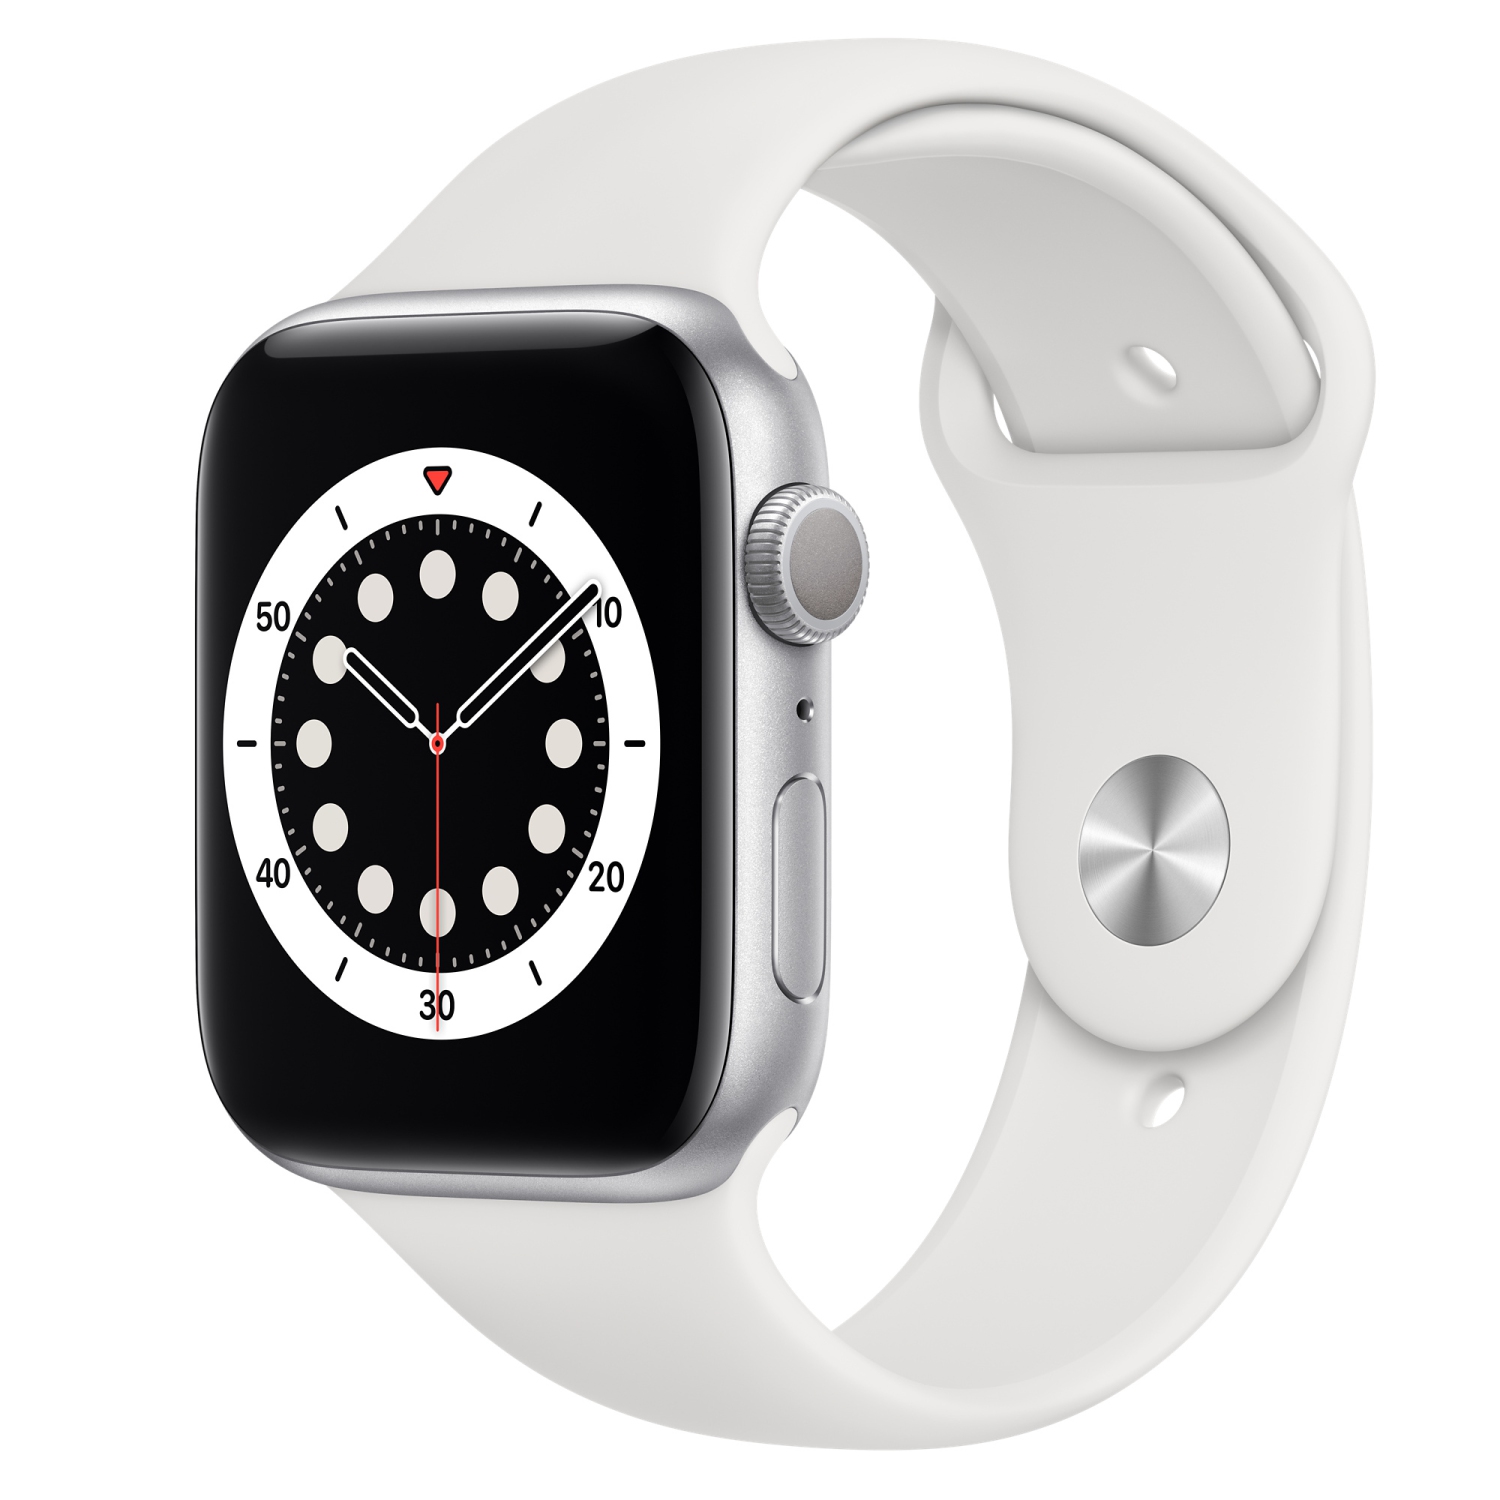 Refurbished (Good) - Apple Watch Series 6 (GPS + Cellular) 44mm Silver Aluminum Case with White Sport Band - Refurbished (R2 Certified)